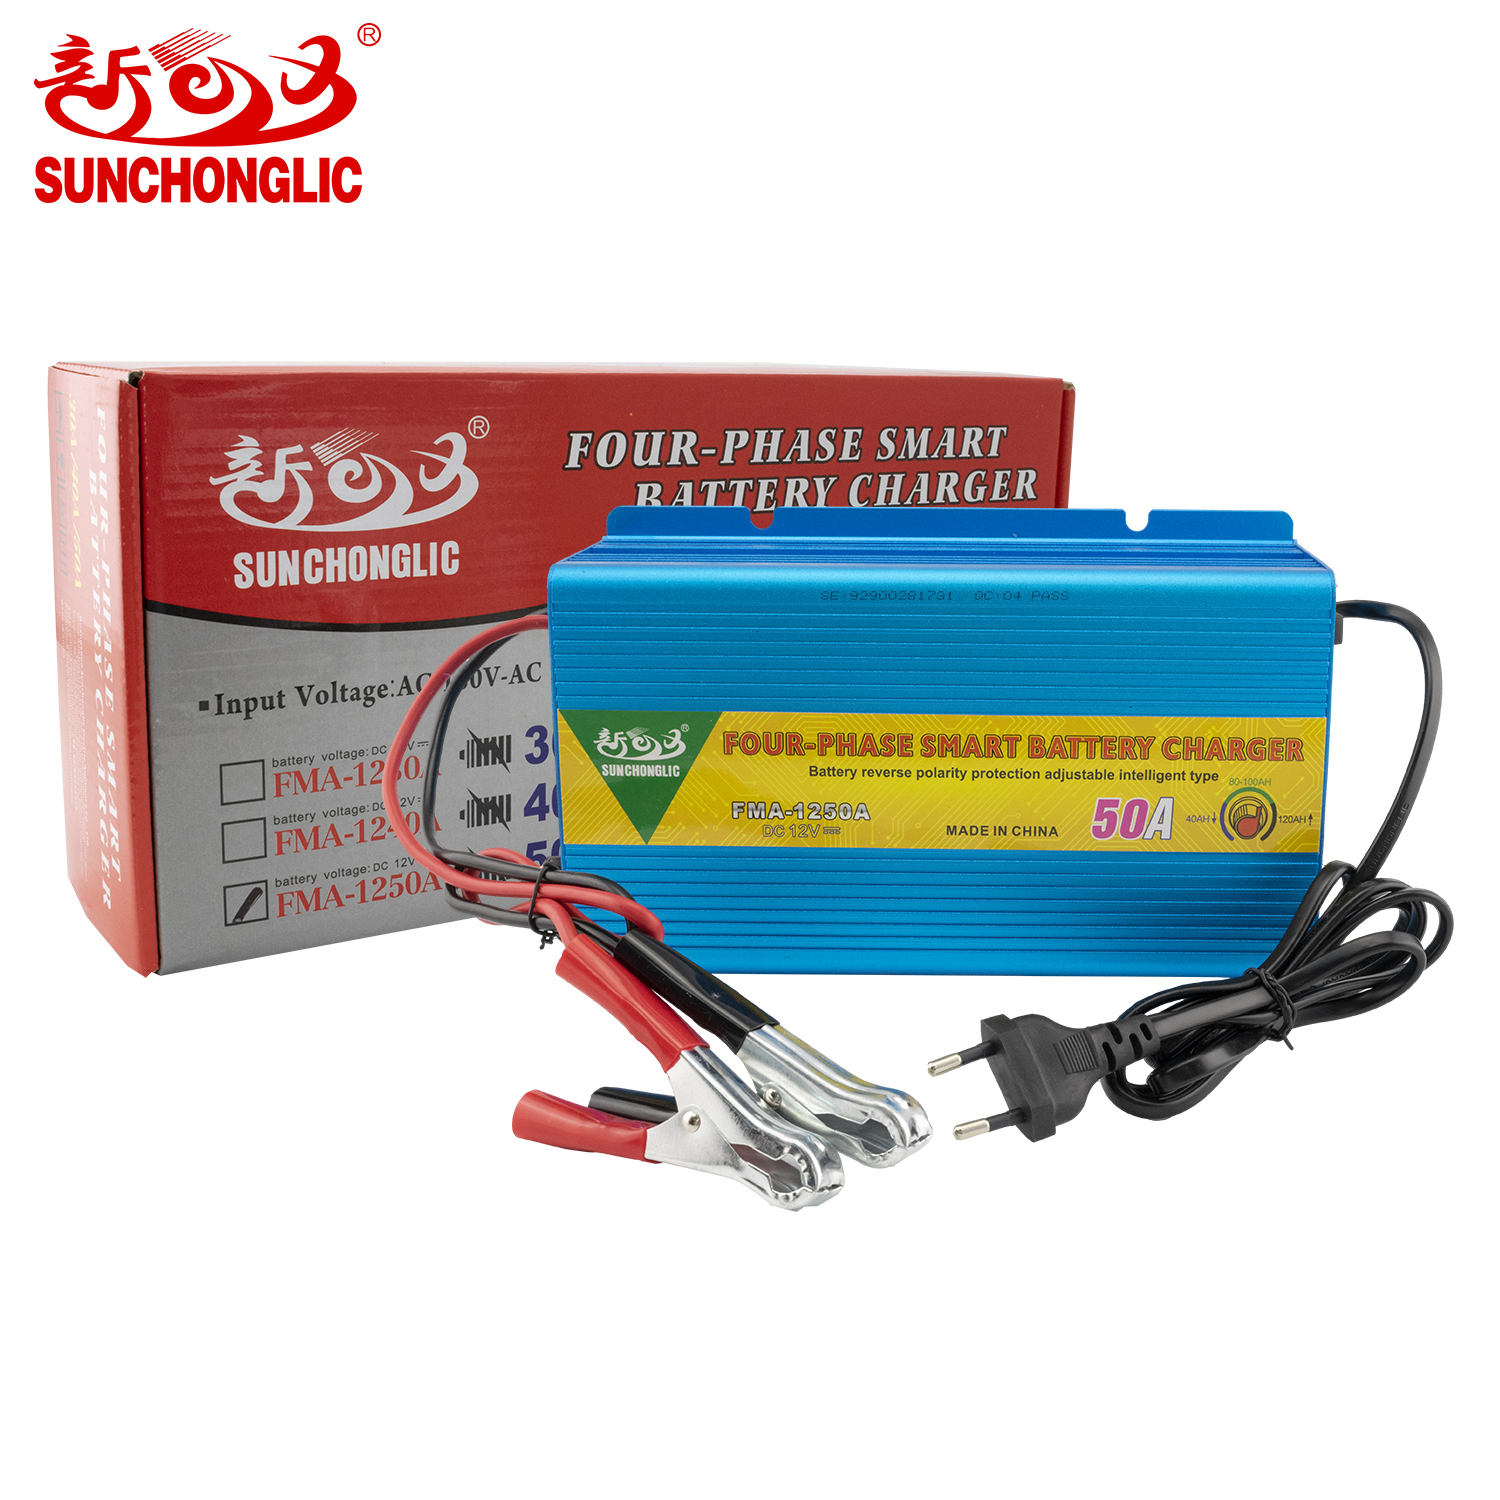 Sunchonglic 12v 50a four phase car lead acid battery charger 